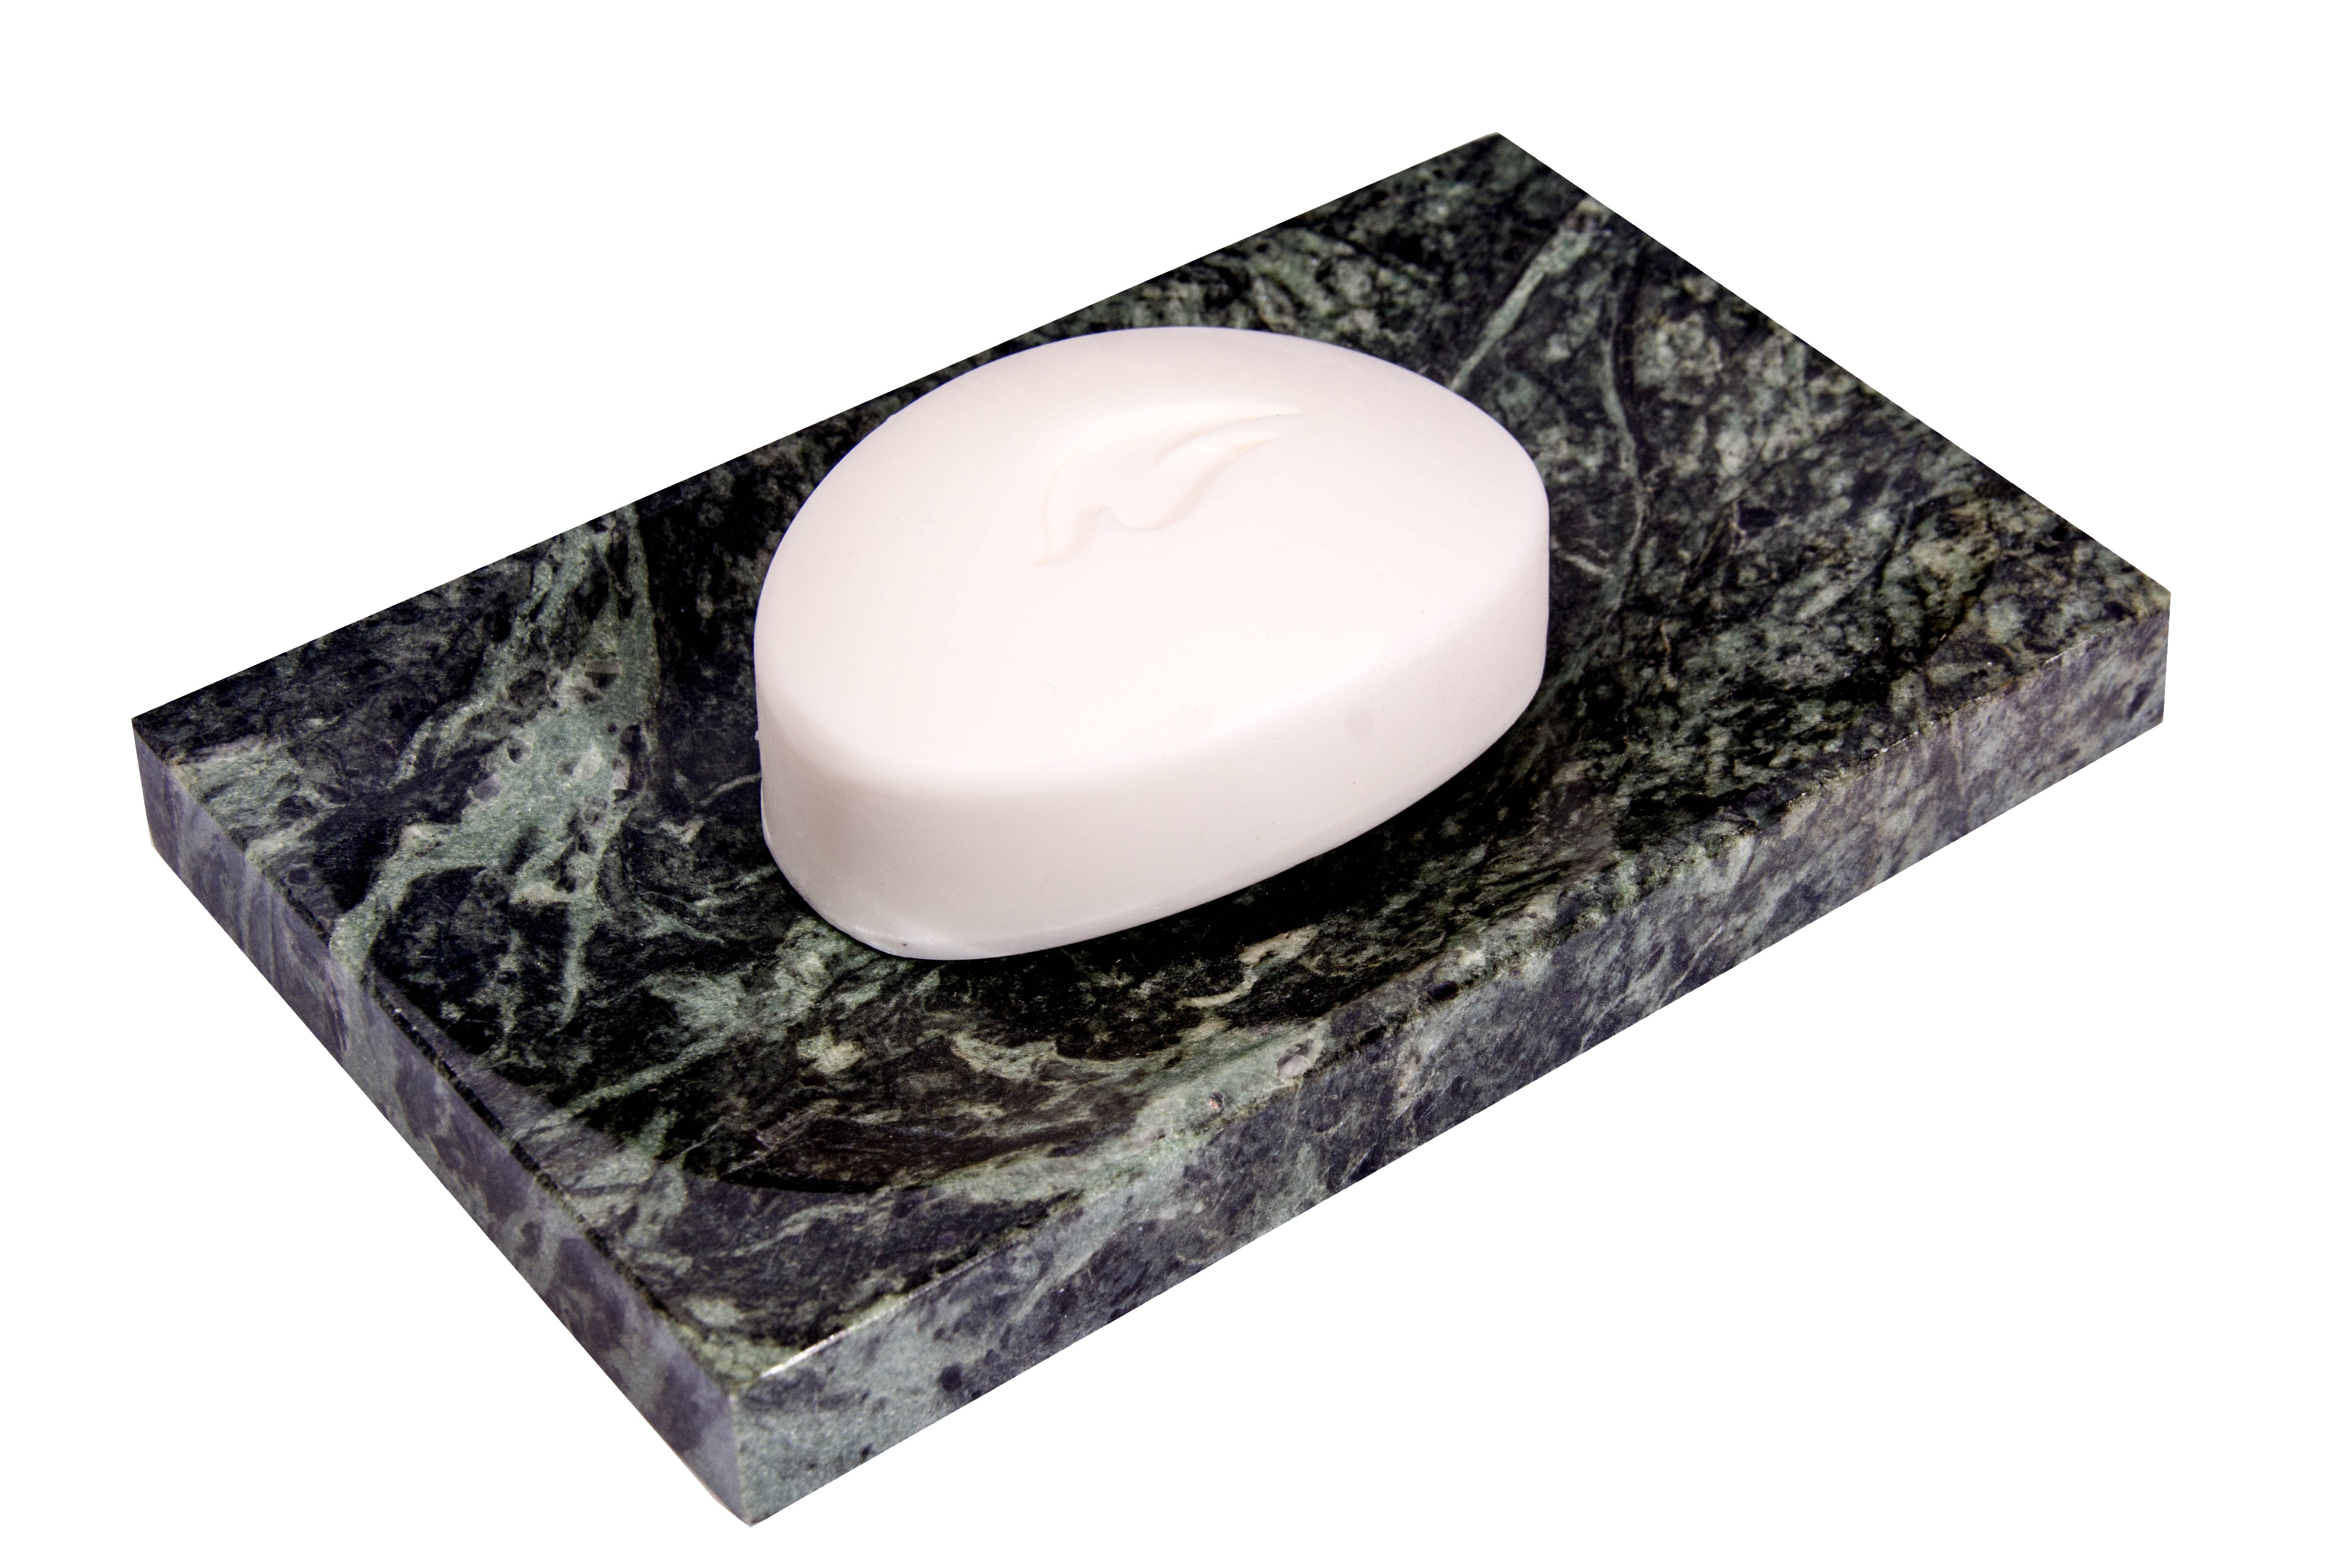 Green Marble Soap Dish - Polished and Shiny Marble Dish Holder Beautifully Crafted Bathroom Accessory by CraftsOfEgypt